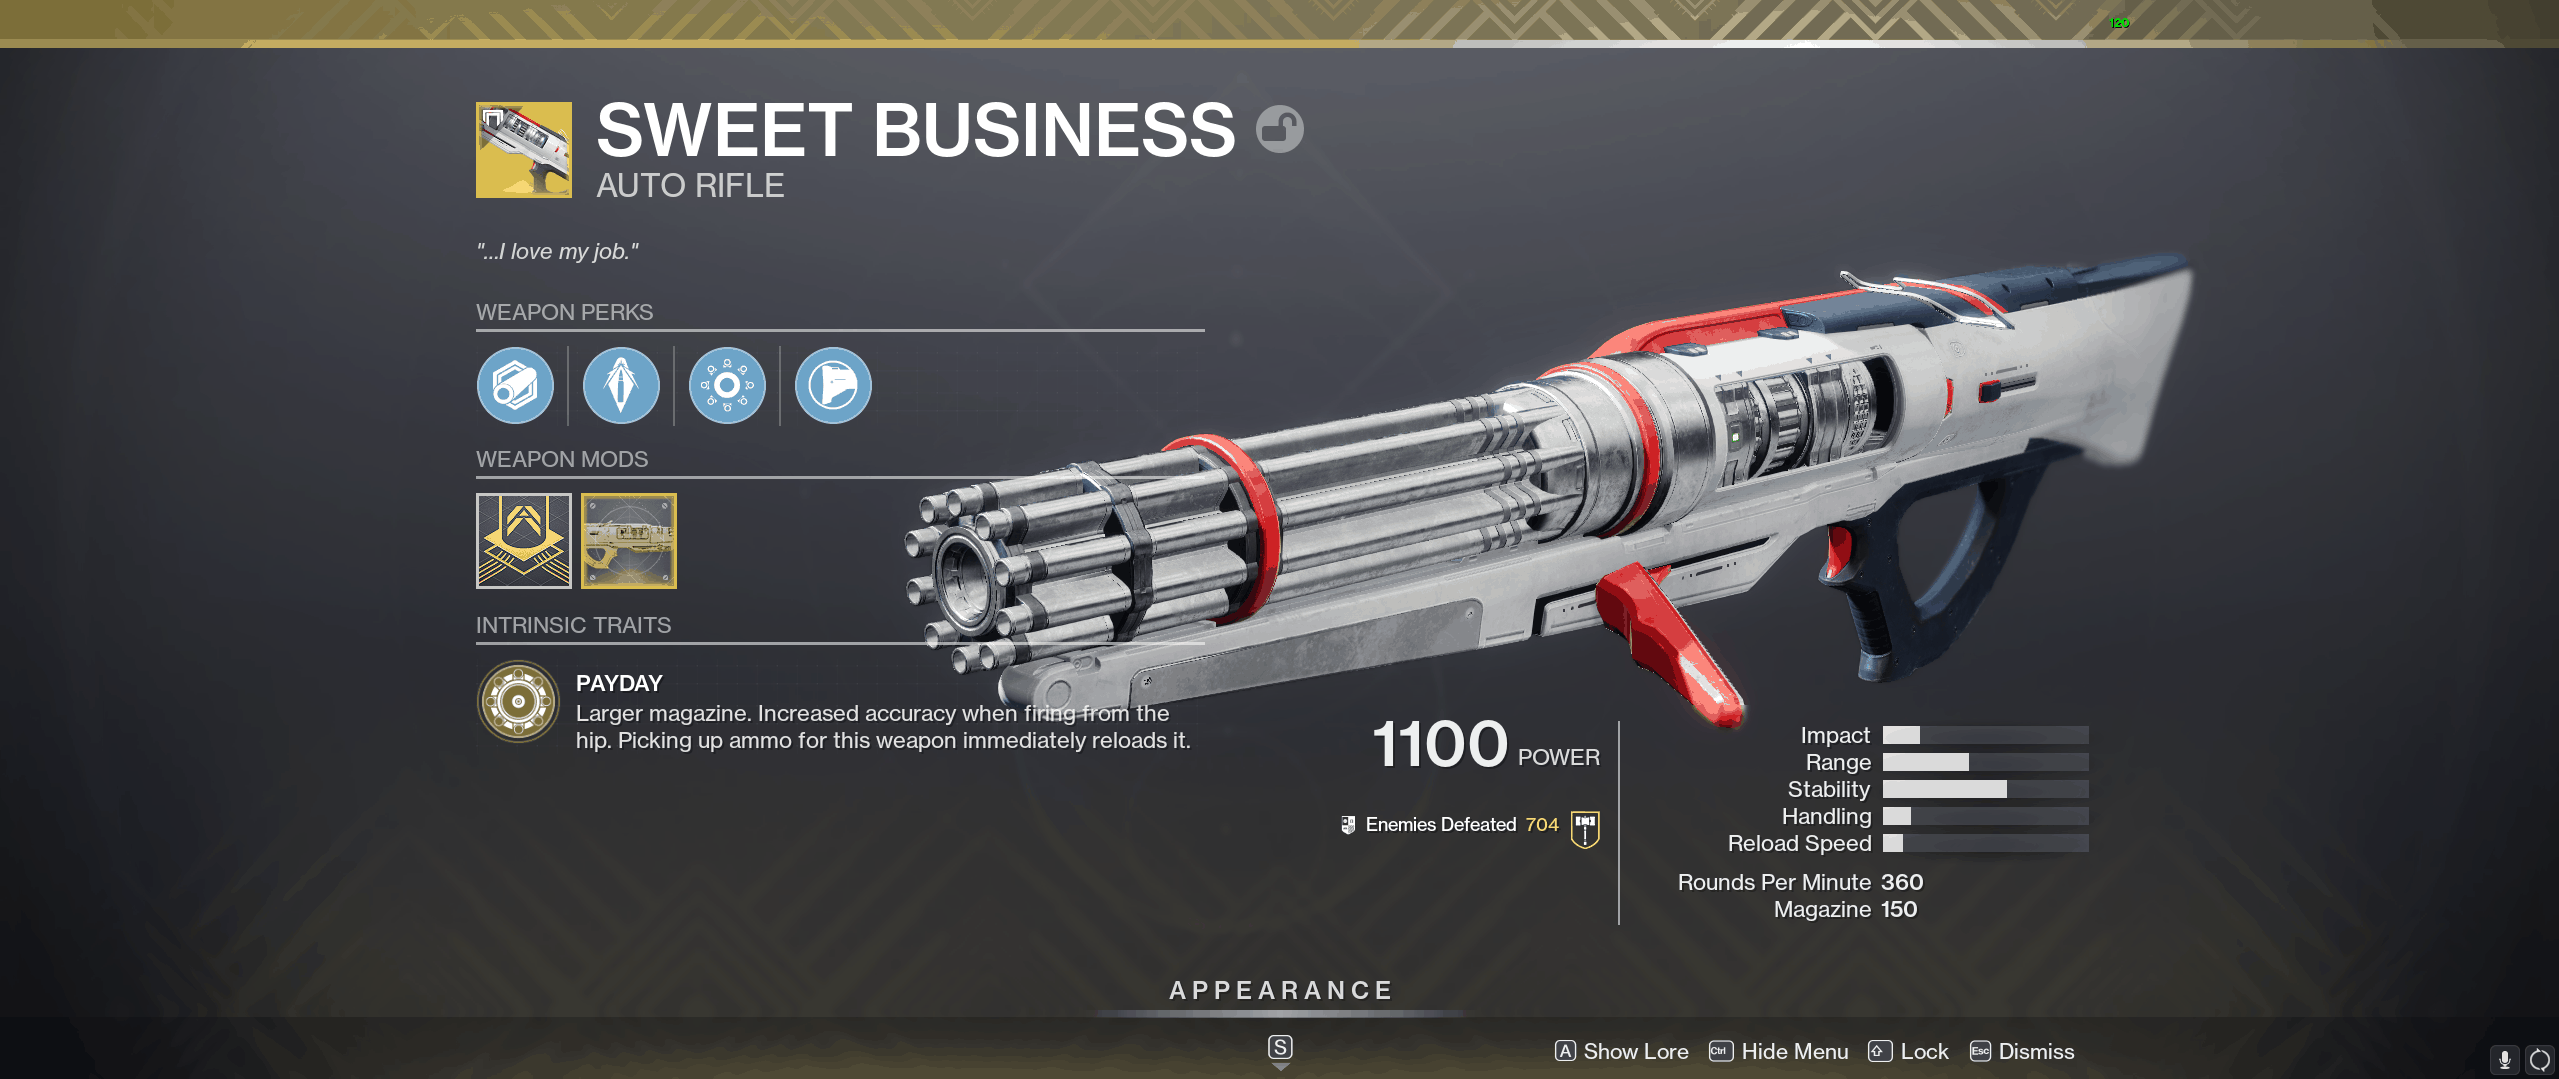 How to Acquire Sweet Business in Destiny 2